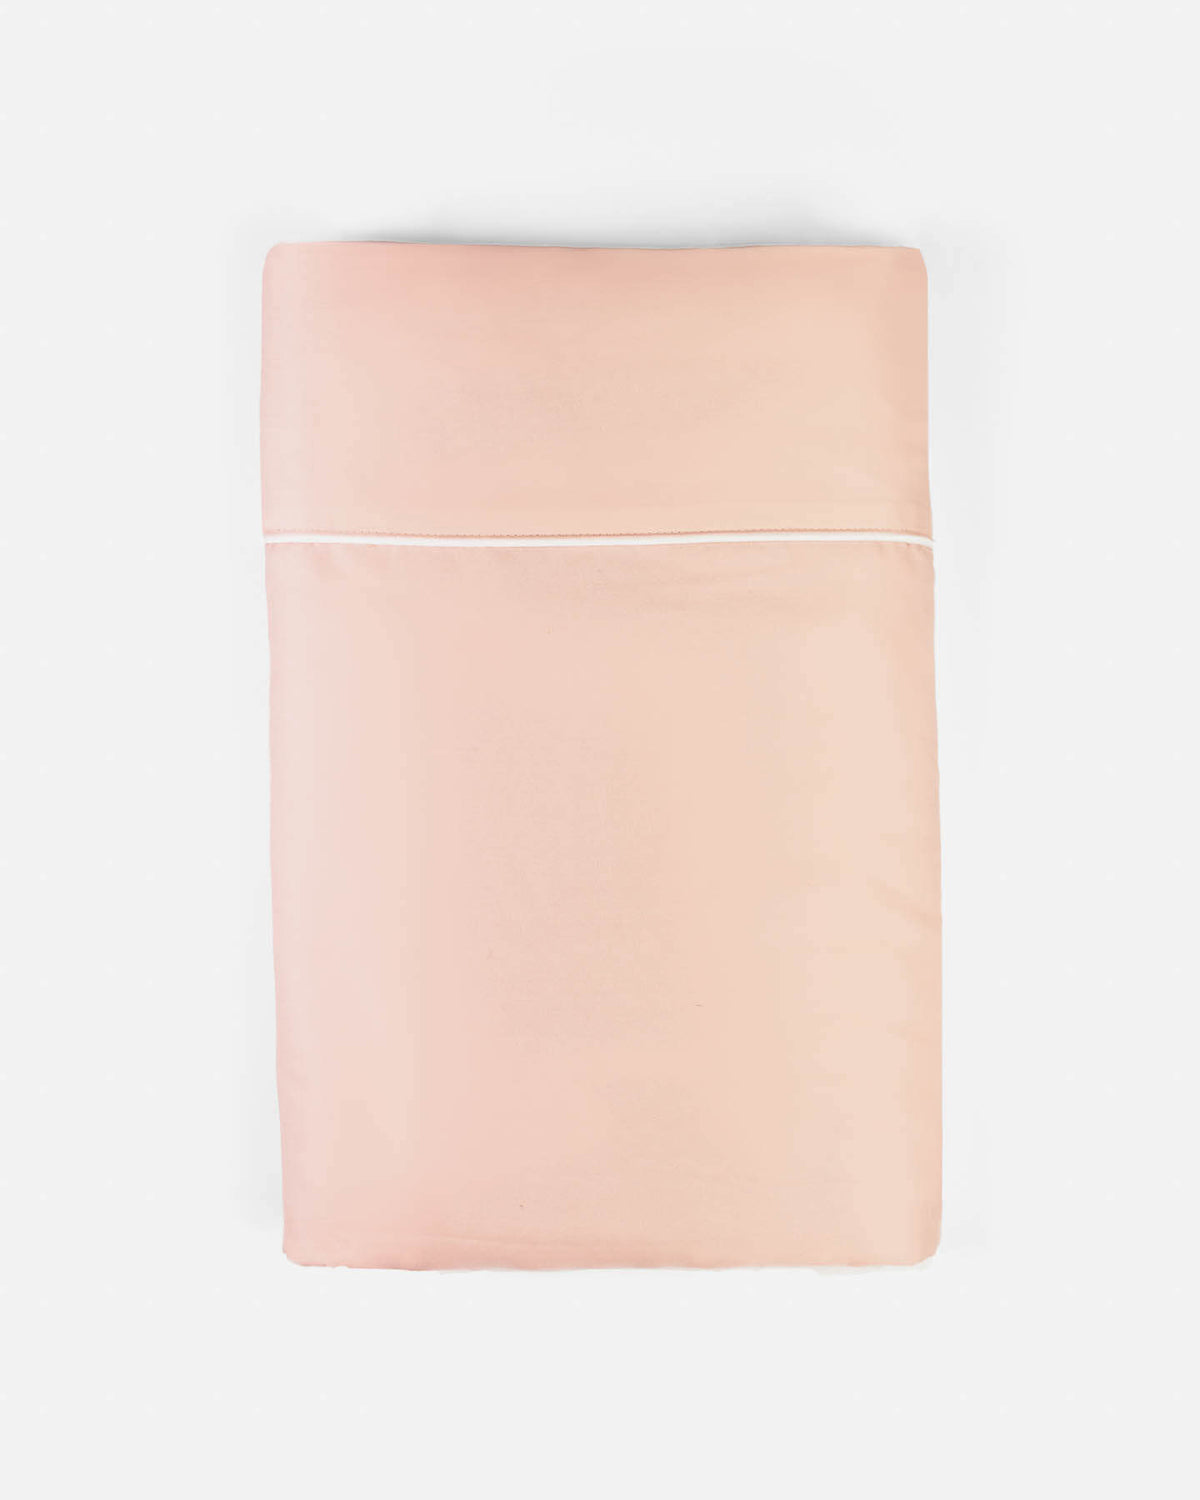 ava and ava ph organic bamboo lyocell flat sheet pastel blush pink with white contrast piping at the top hem